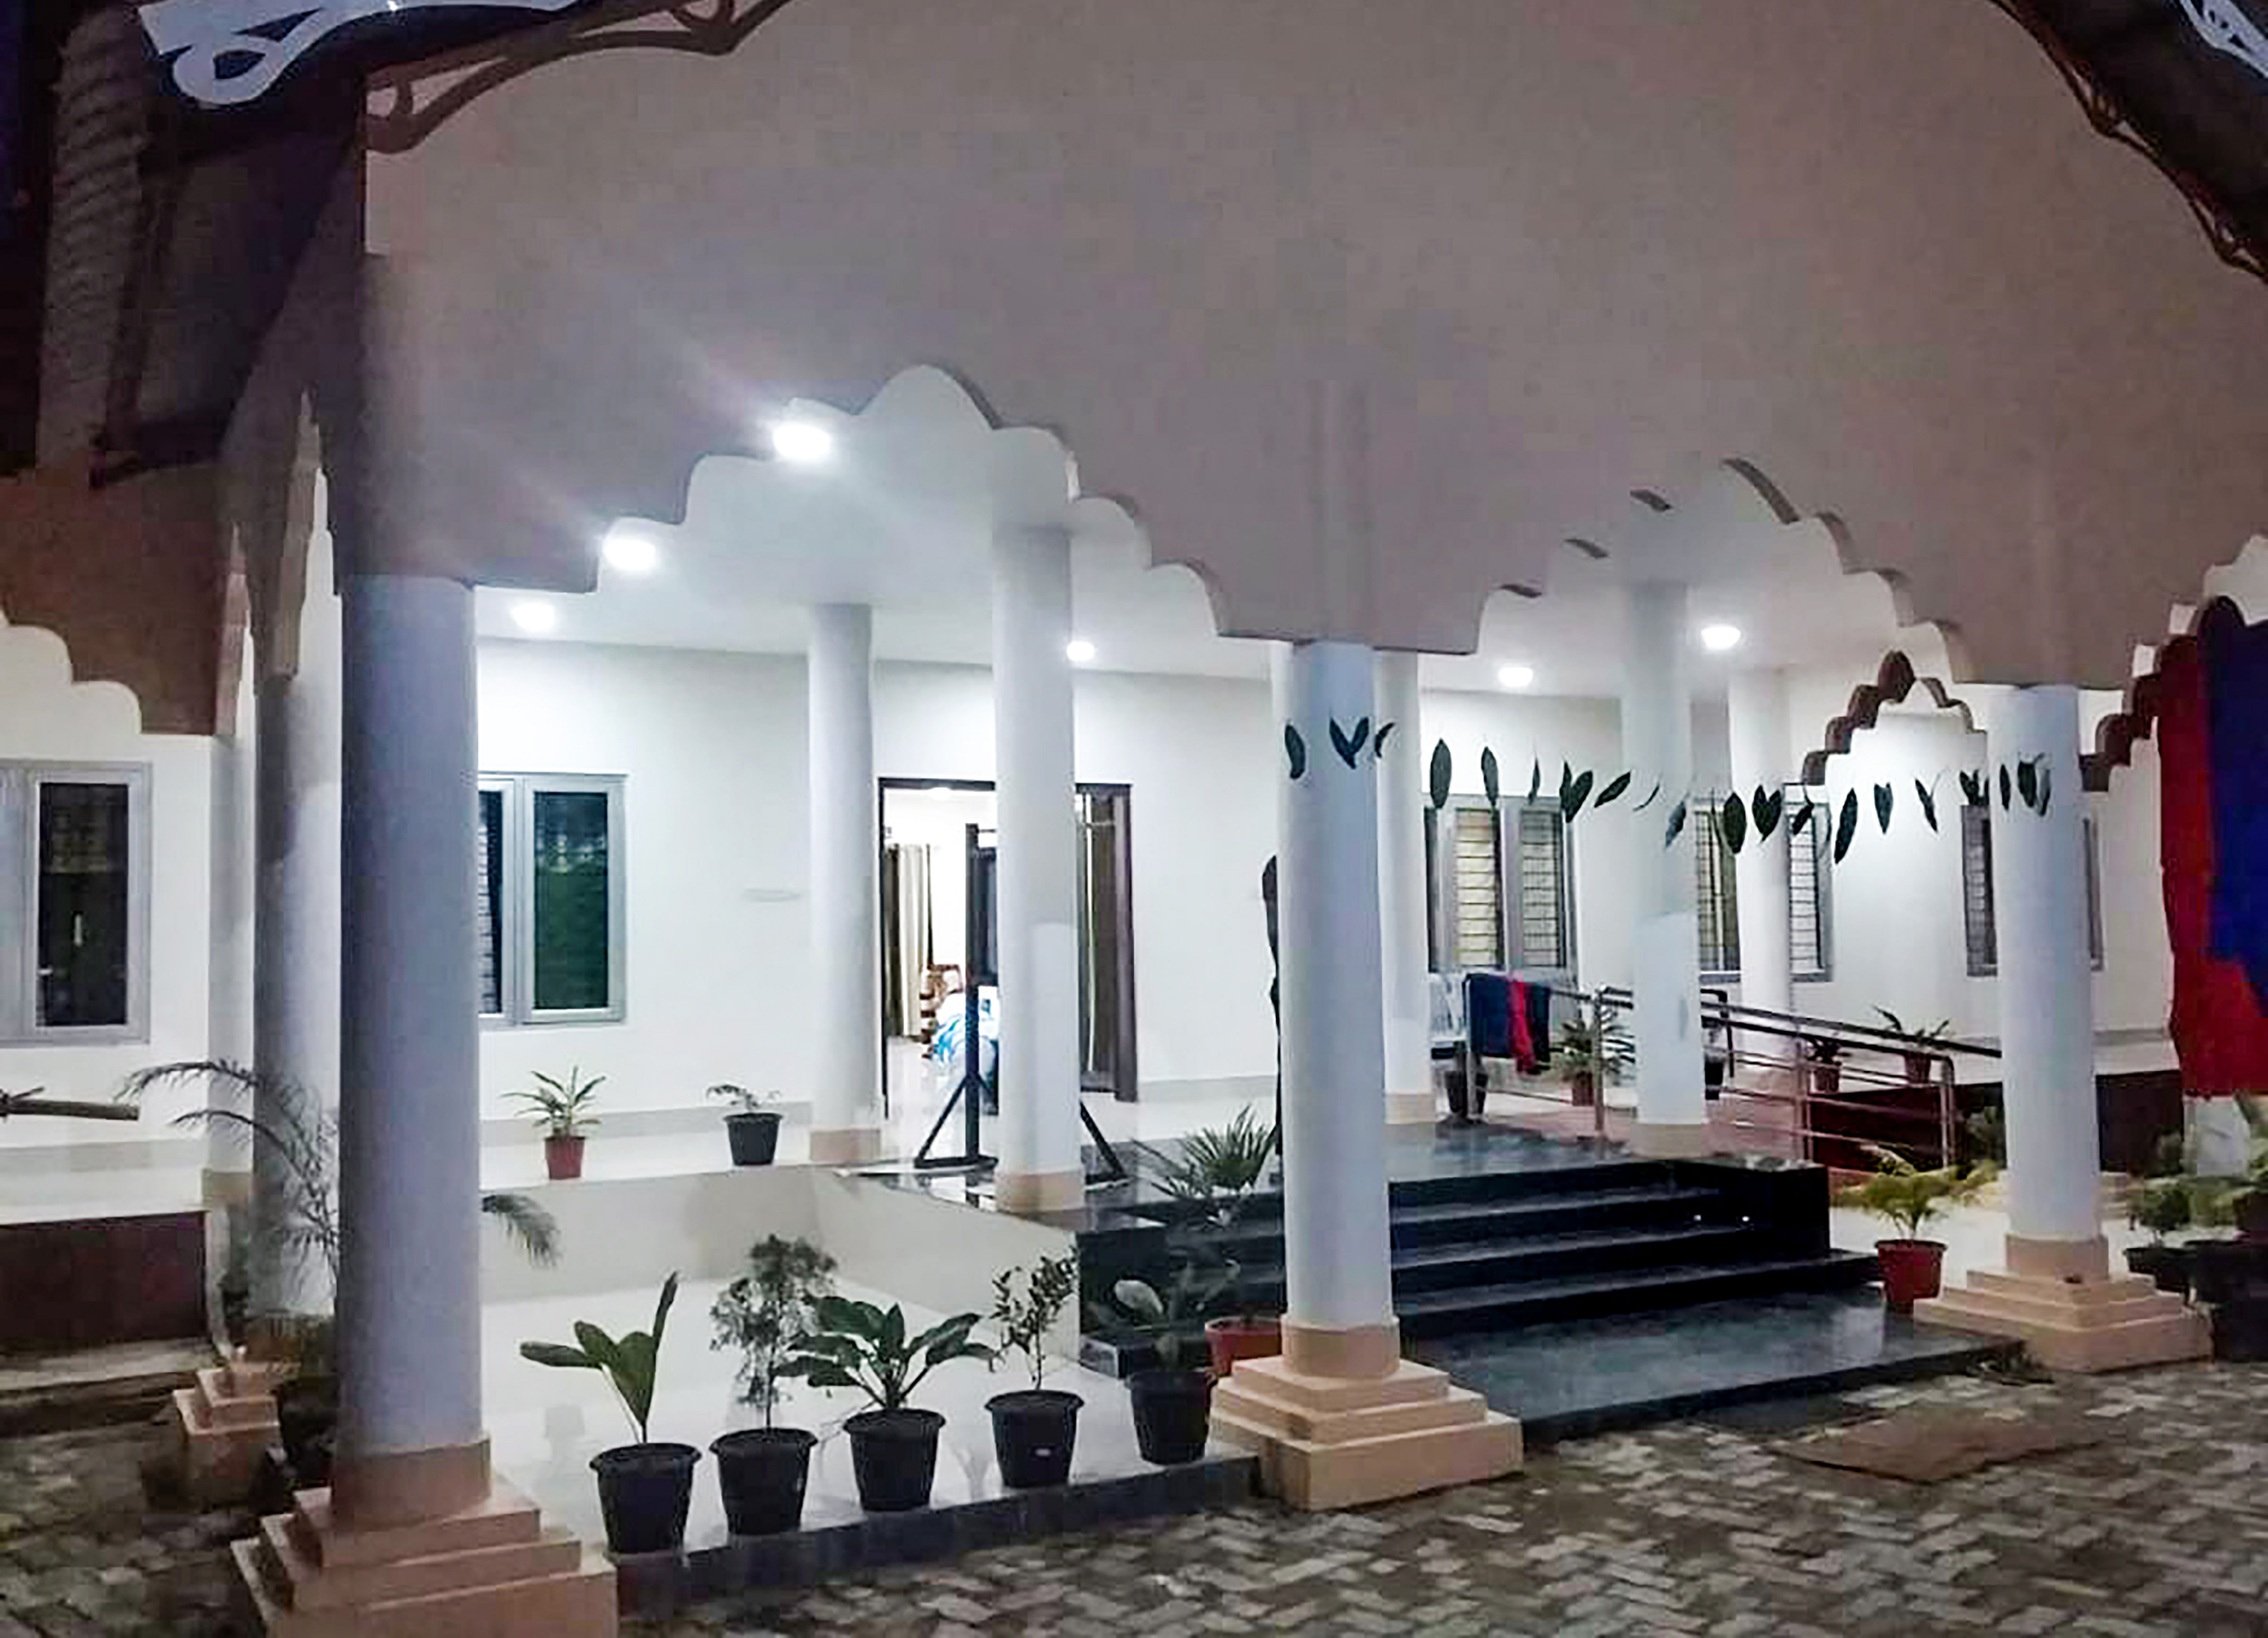  As many as 55 police stations in Assam, out of around 340, have been reconstructed into swanky buildings, with a small crèche, separate women and juvenile corners, a lounge with comfortable sofa, under a special citizen friendly project. Credit: PTI Photo